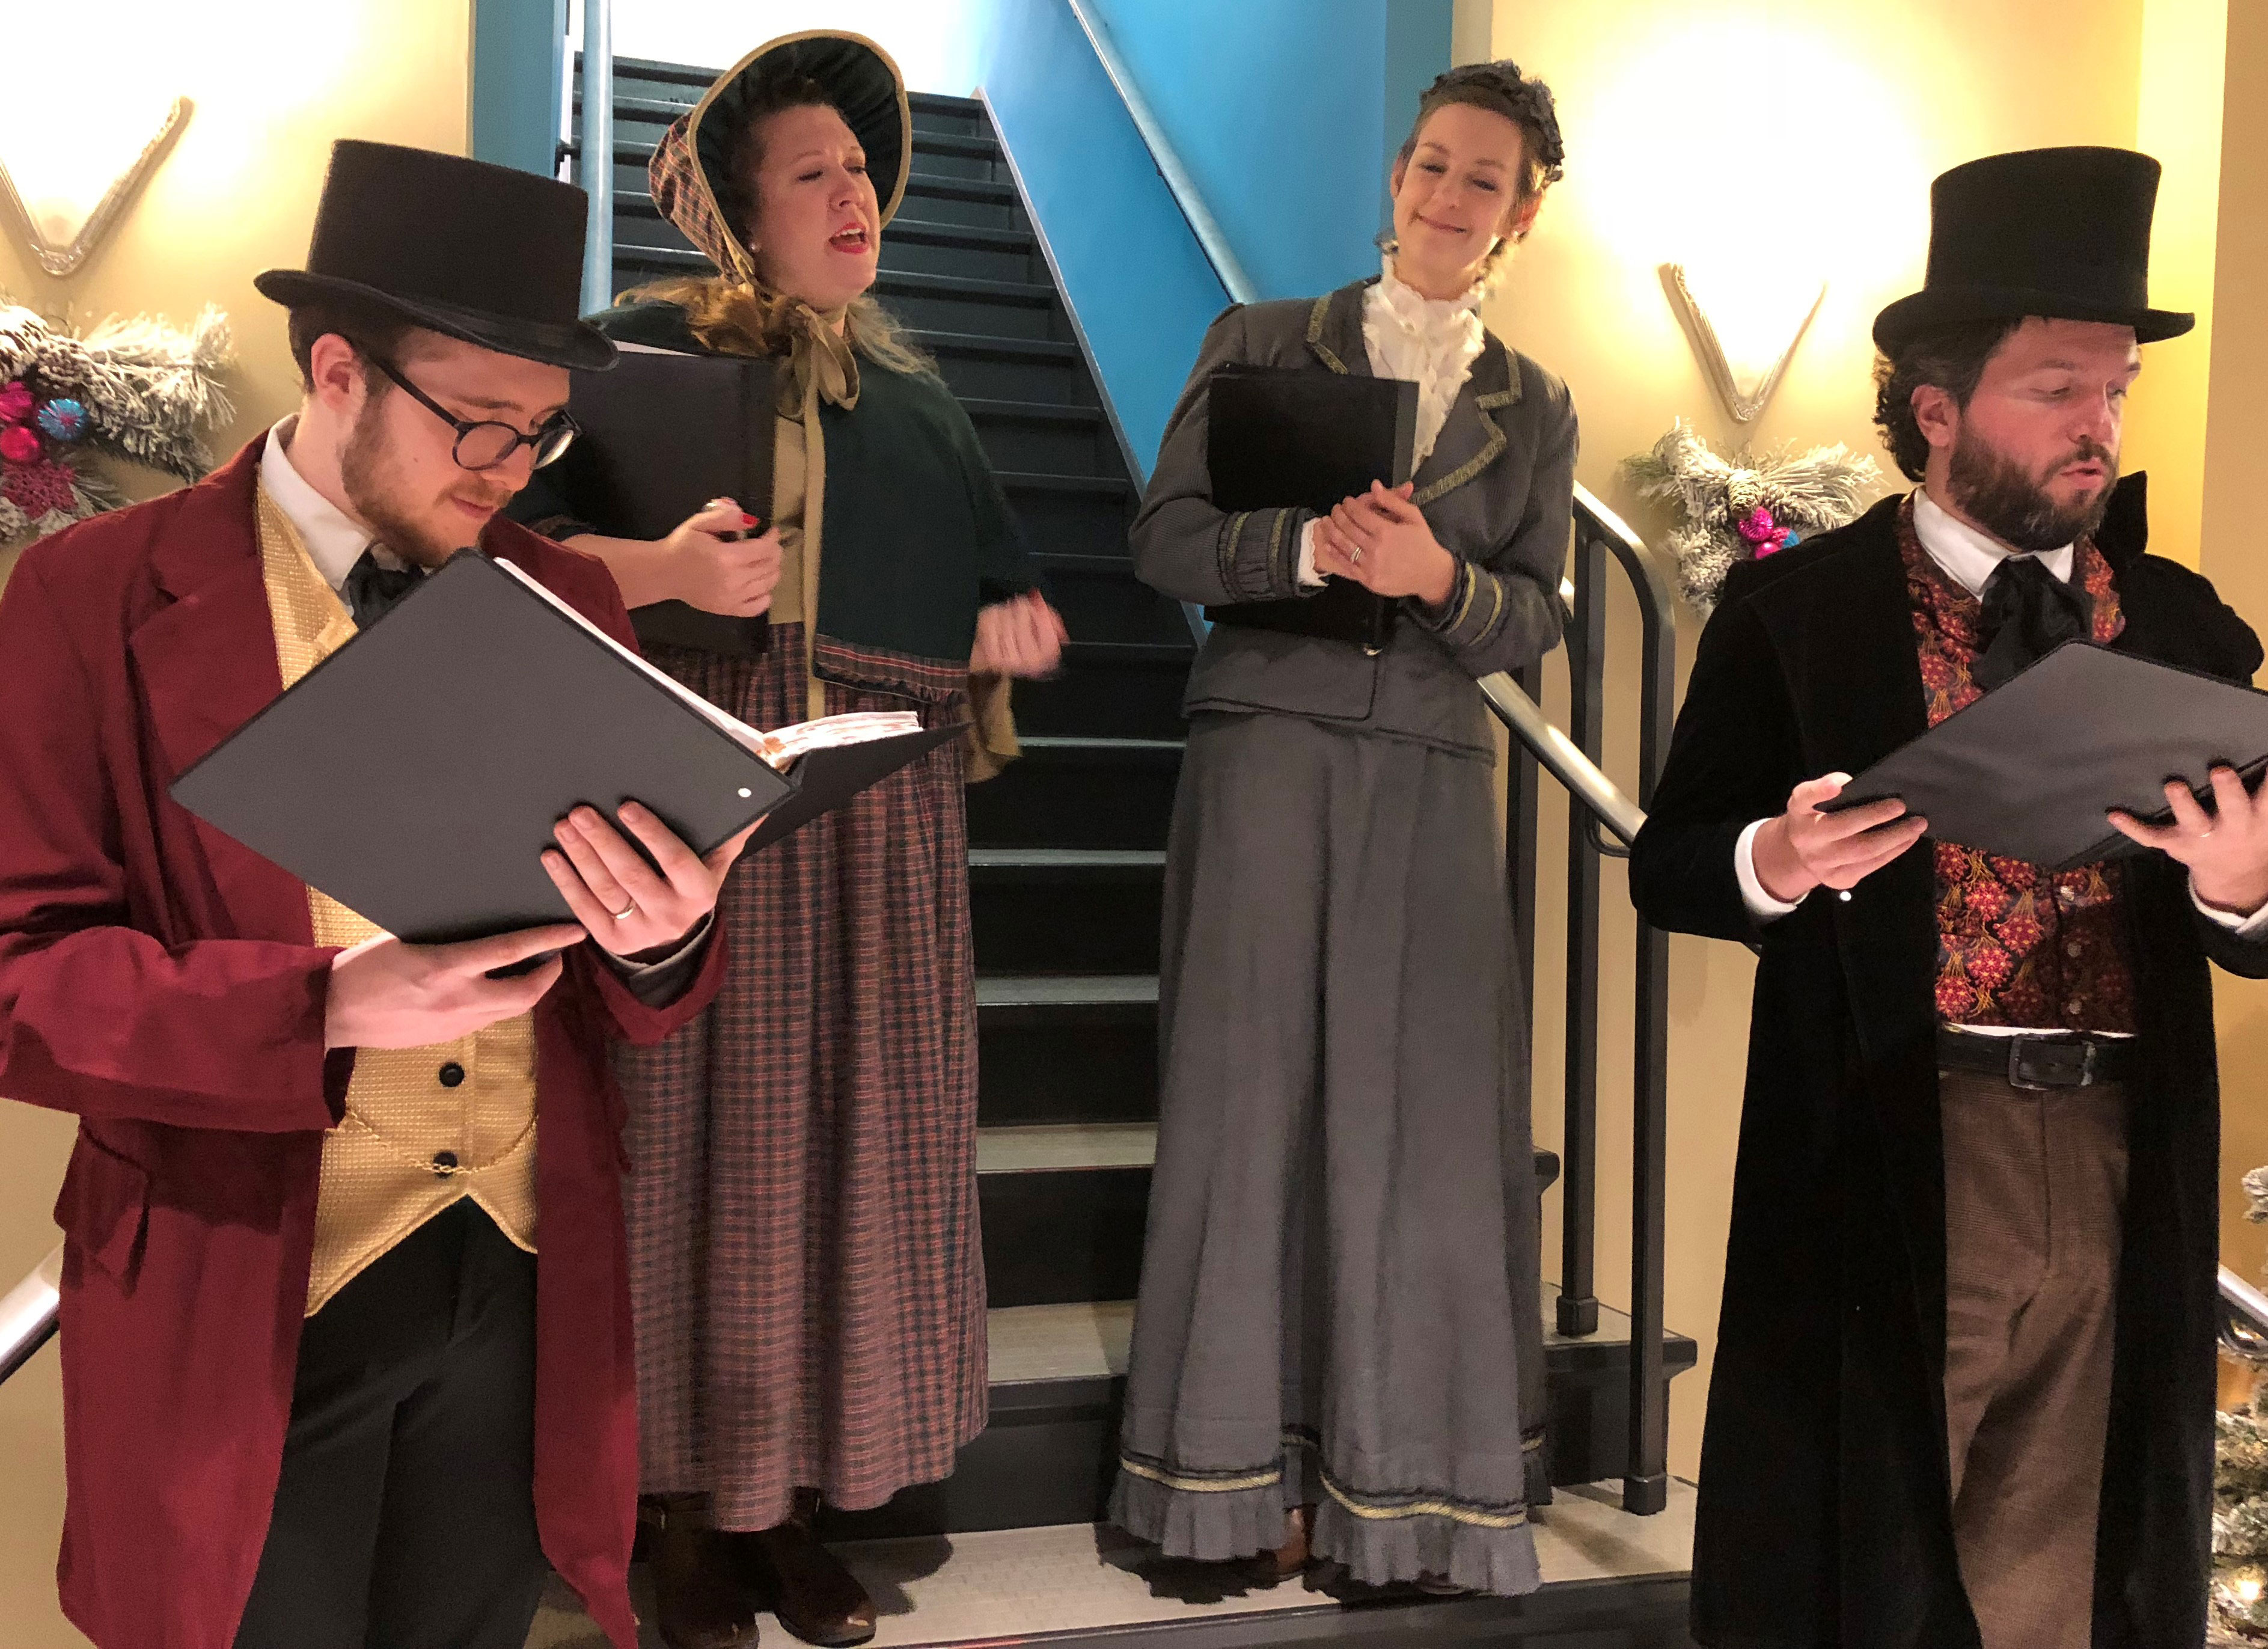 Enjoy sounds of the holiday season from the American Caroling Company performing at the Marilyn Horne Museum for a Dickens Christmas at Horne Hall on Dec. 14, 2019.